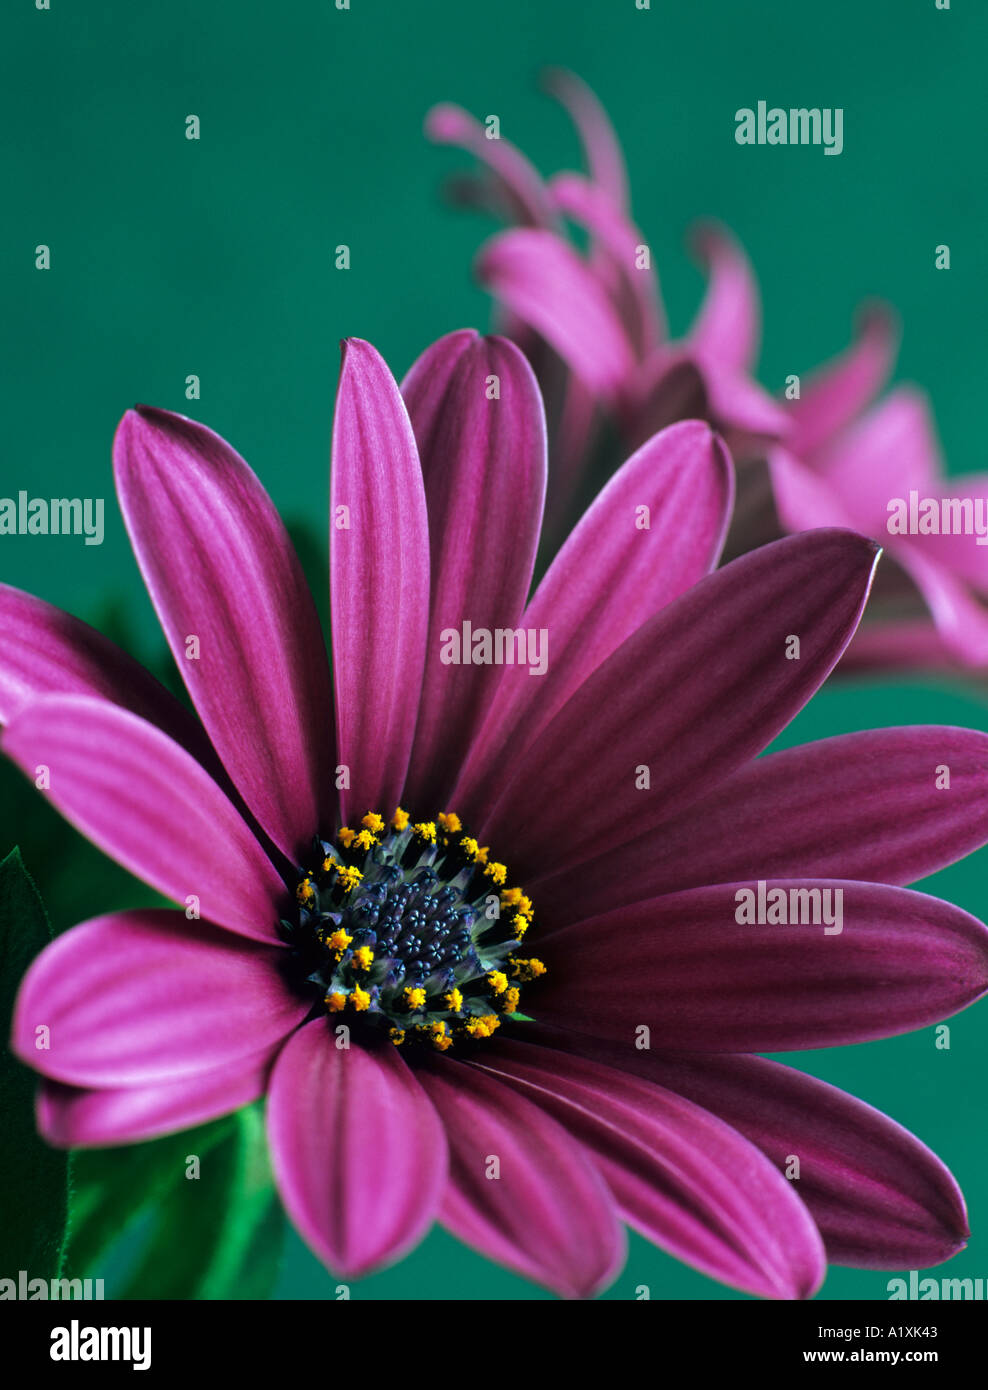 Osteospermum Purple Osoutis two flowers in close up focused on front flower against green background Stock Photo